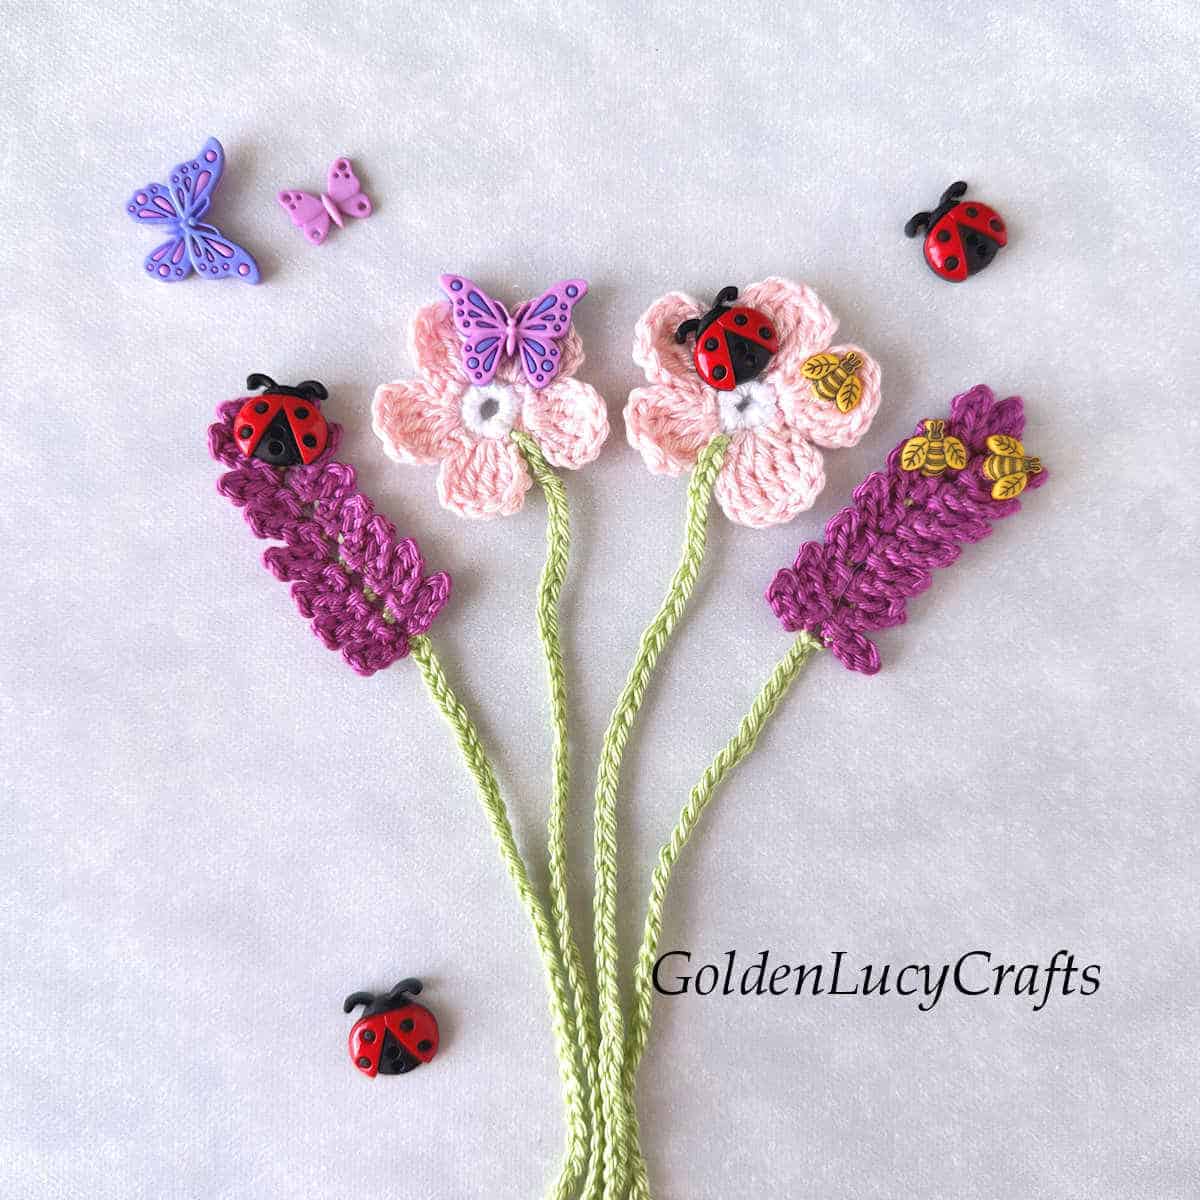 Two lavender crochet bookmarks and two cherry blossom crochet bookmarks embellished with craft buttons.